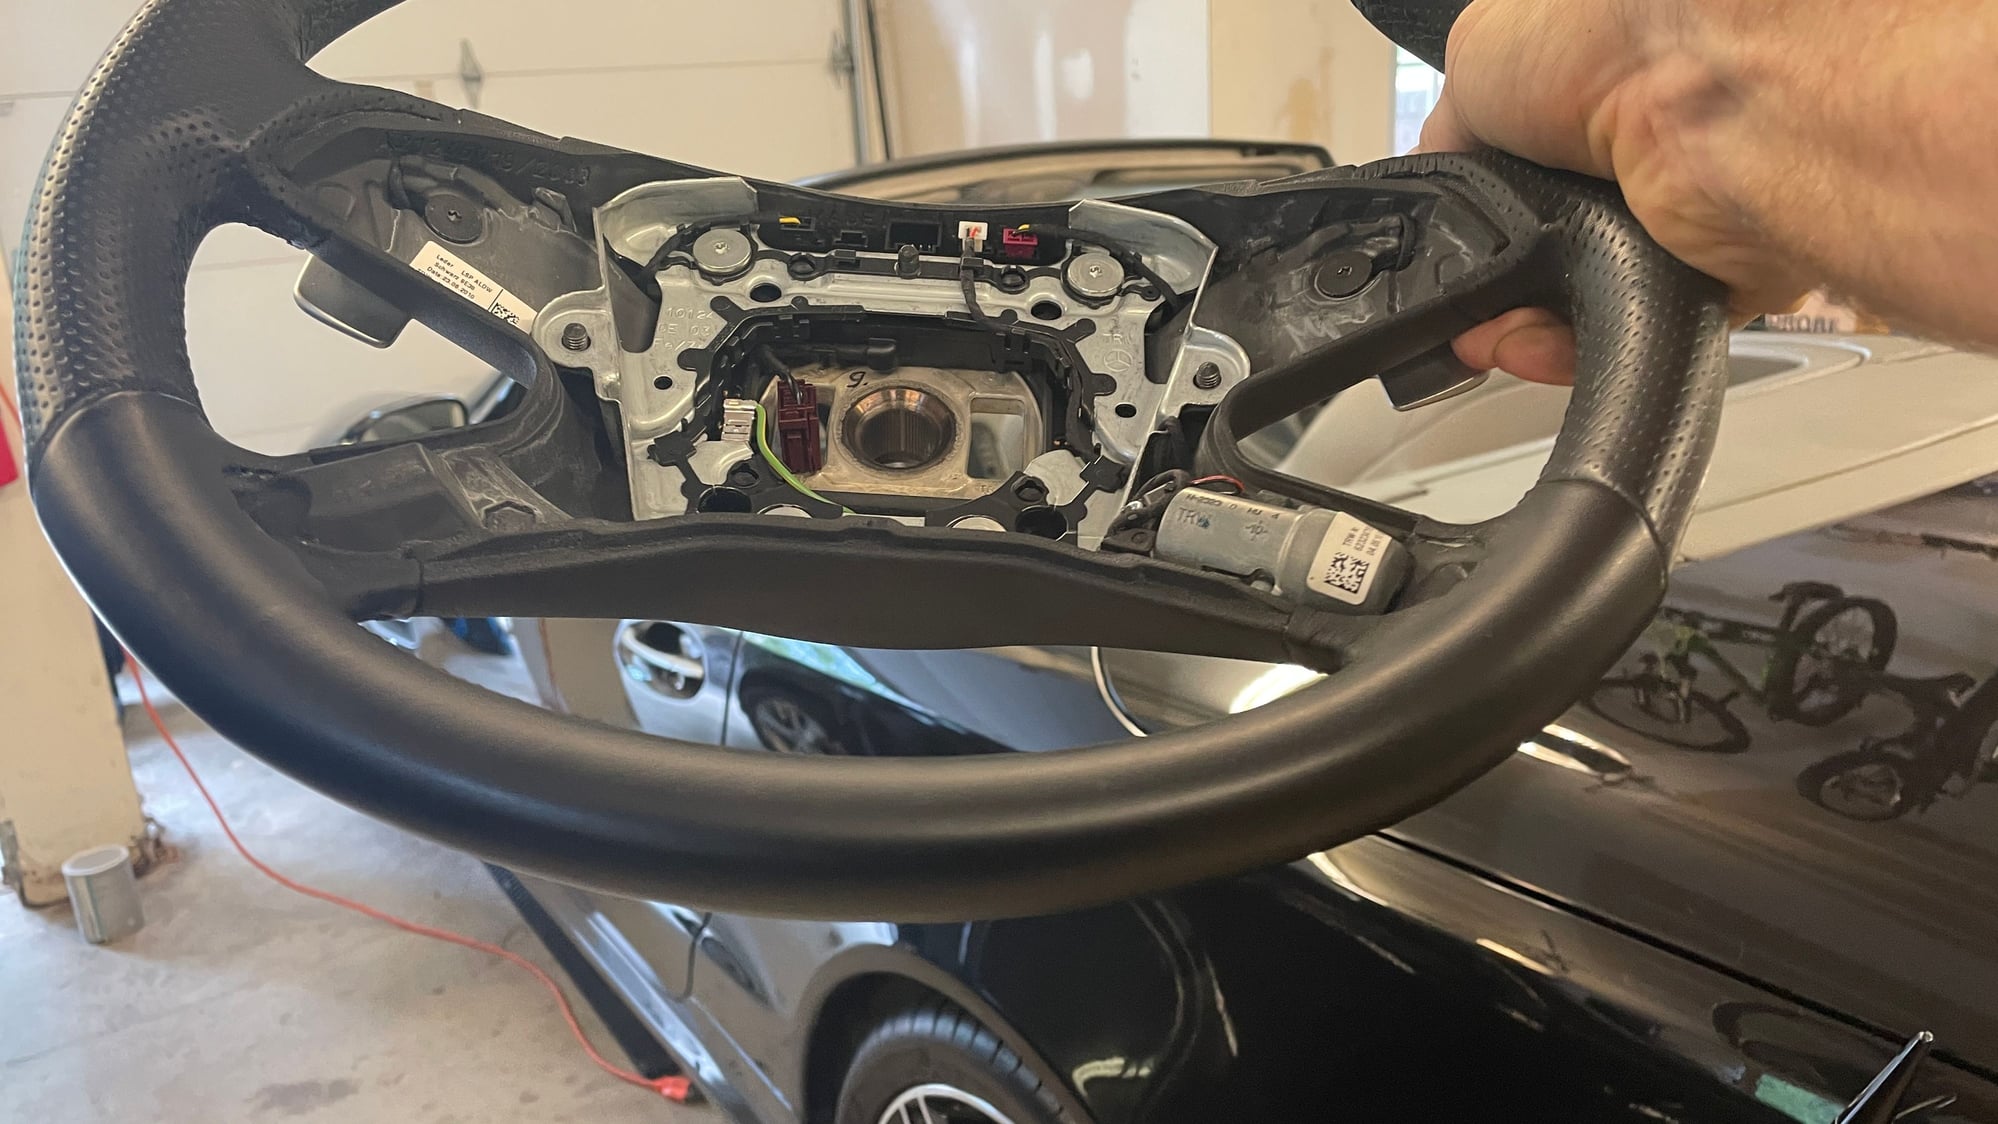 Steering/Suspension - w212 (2010-2011) E63 Steering wheel & Airbag - Used - 2010 to 2011 Mercedes-Benz E63 AMG - Asheville, NC 28804, United States